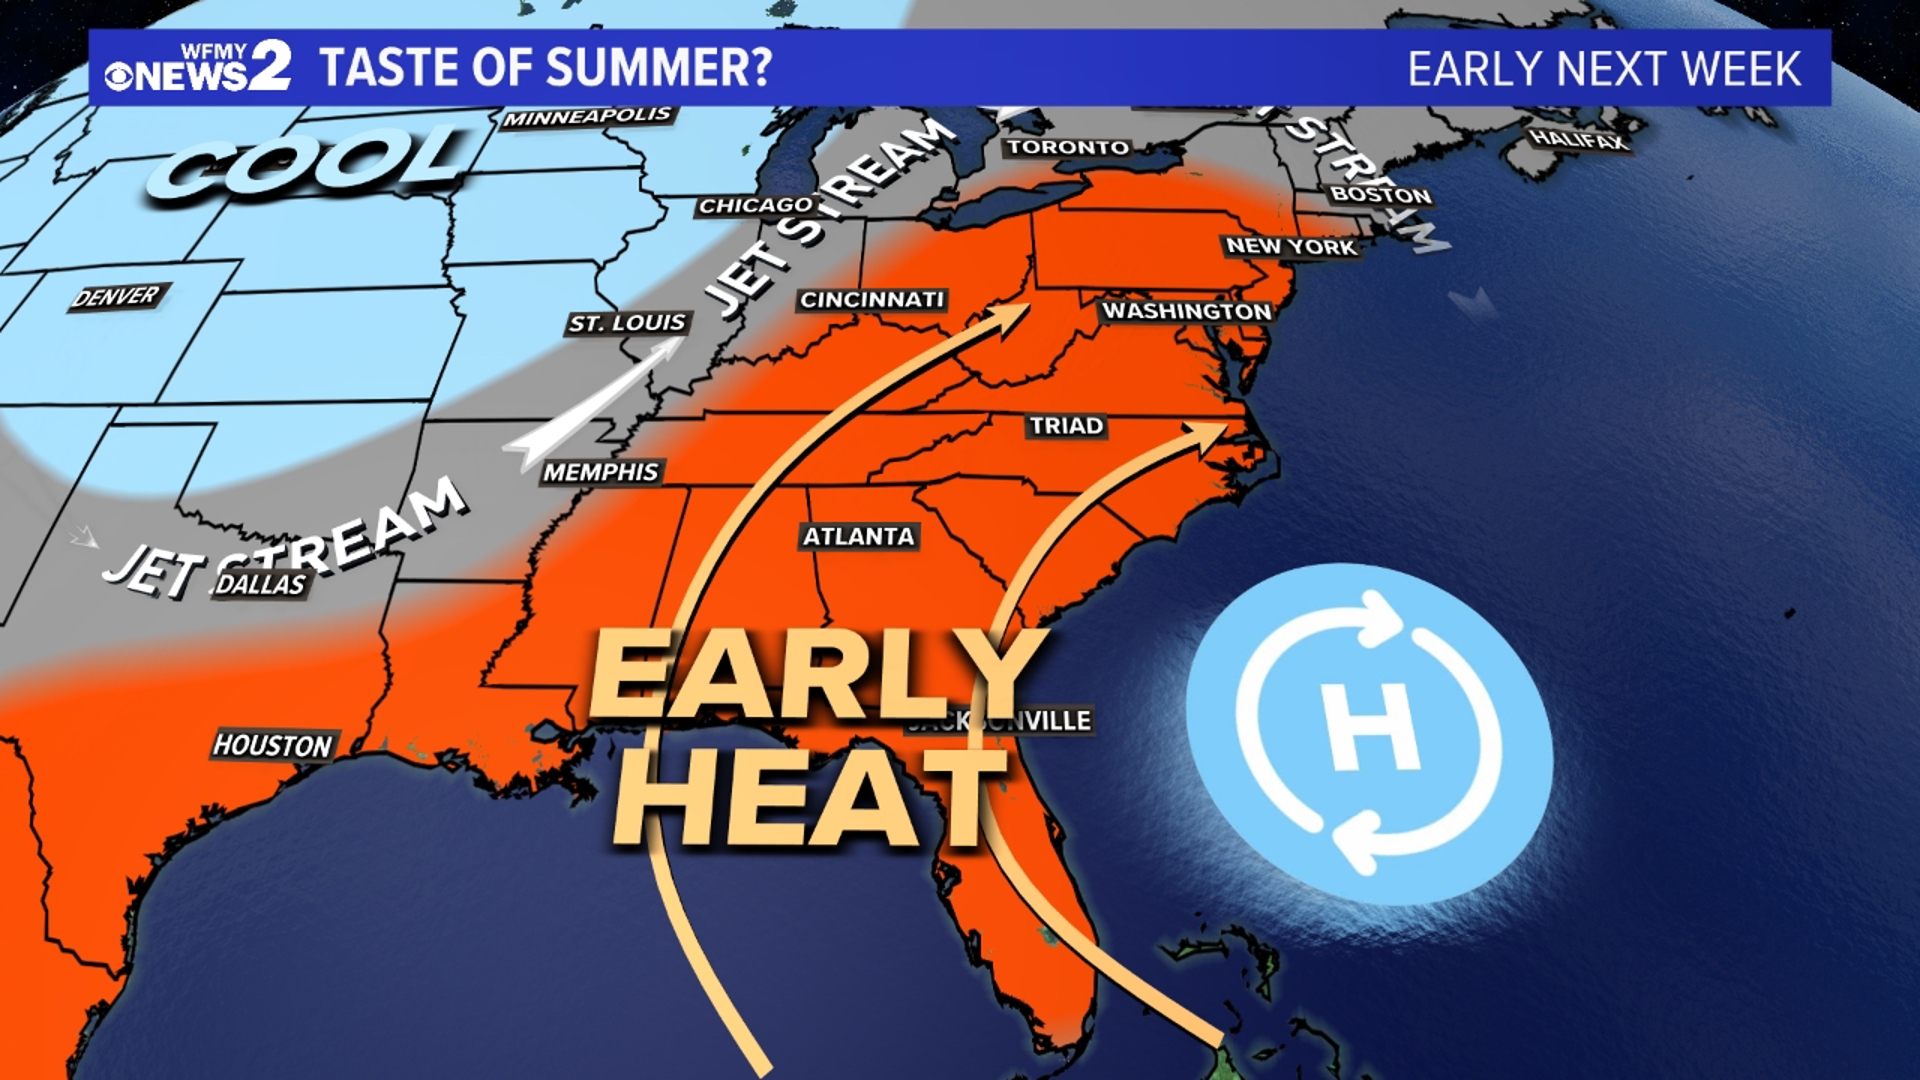 Get ready. A taste of summer is on the way to start next week. Chief Meteorologist Tim Buckley has an update.